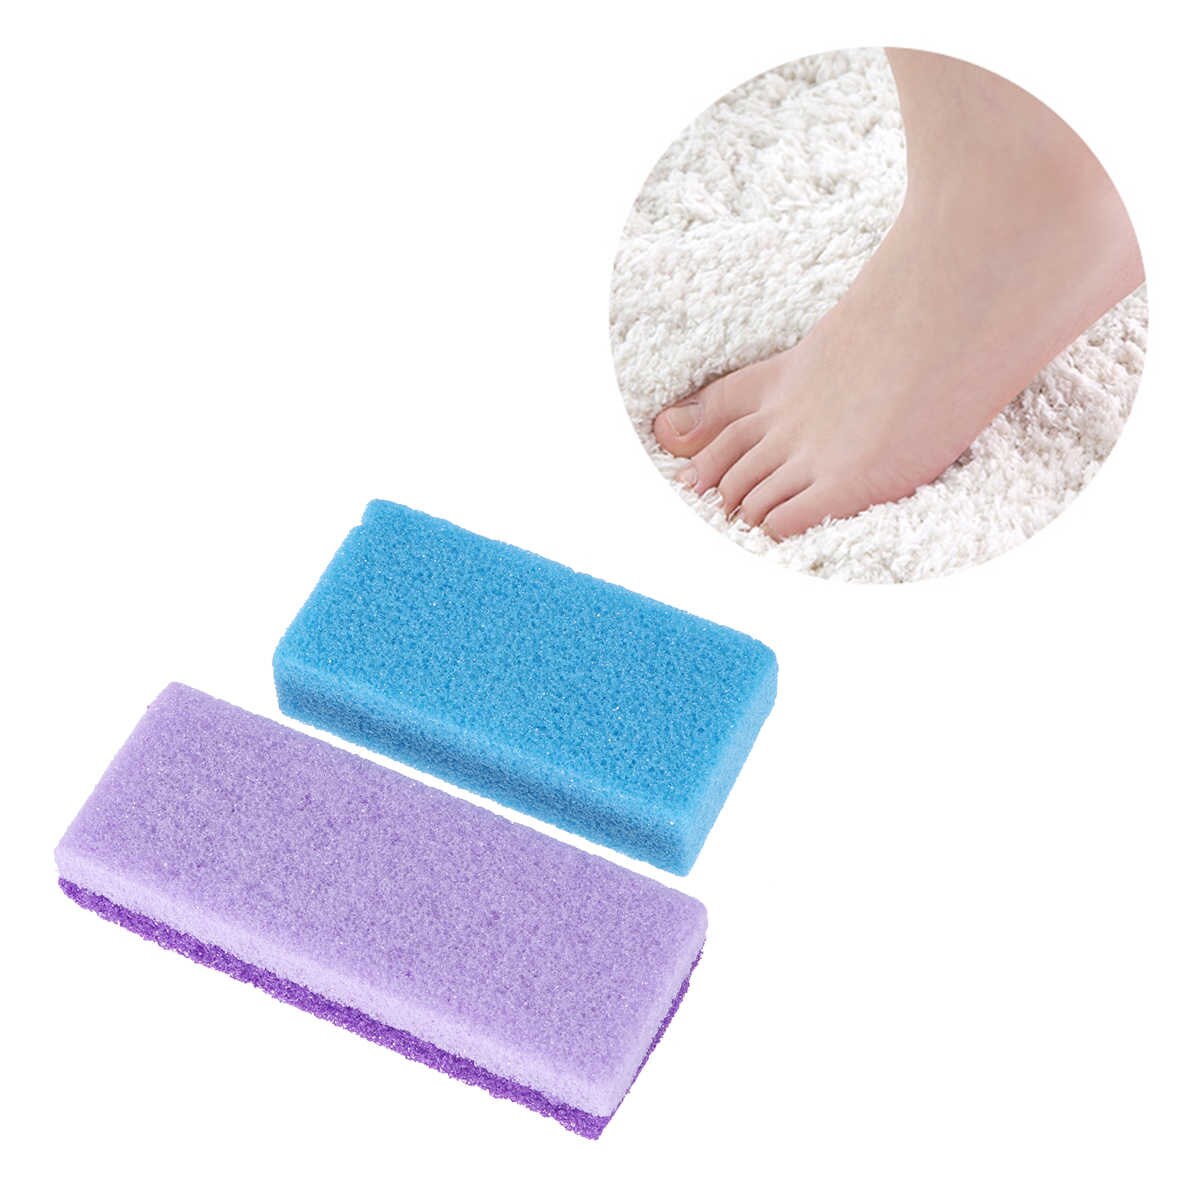 Pumice Stone Callus Removal Foot Clean Pedicure Grit: Course